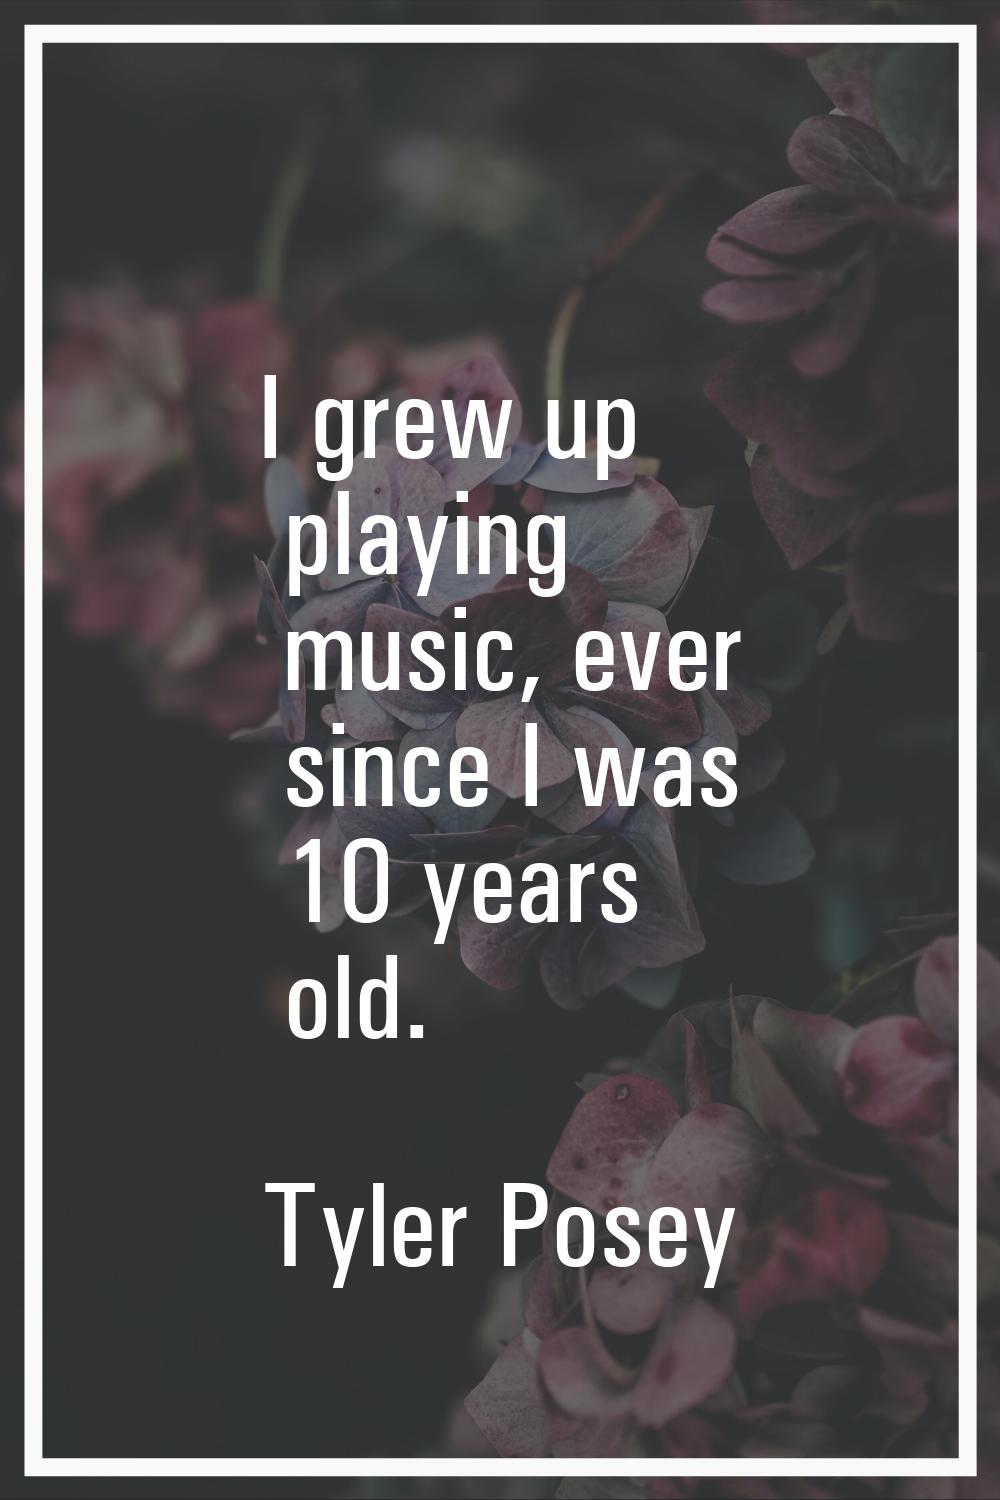 I grew up playing music, ever since I was 10 years old.